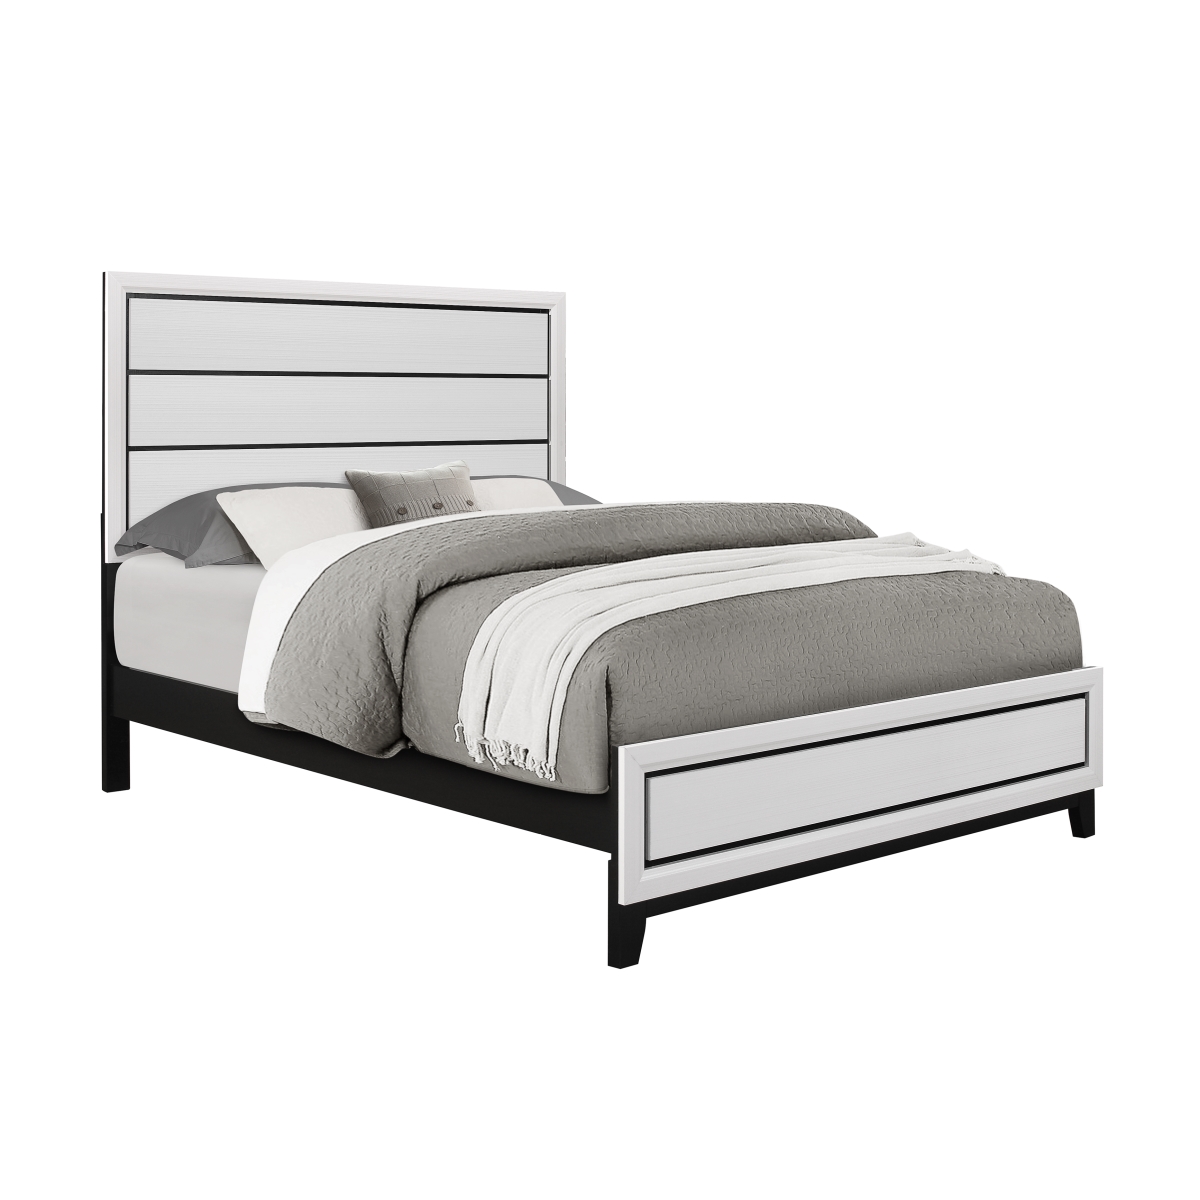 KATE-WH-KB Kate White King Size Bed -  Global Furniture USA